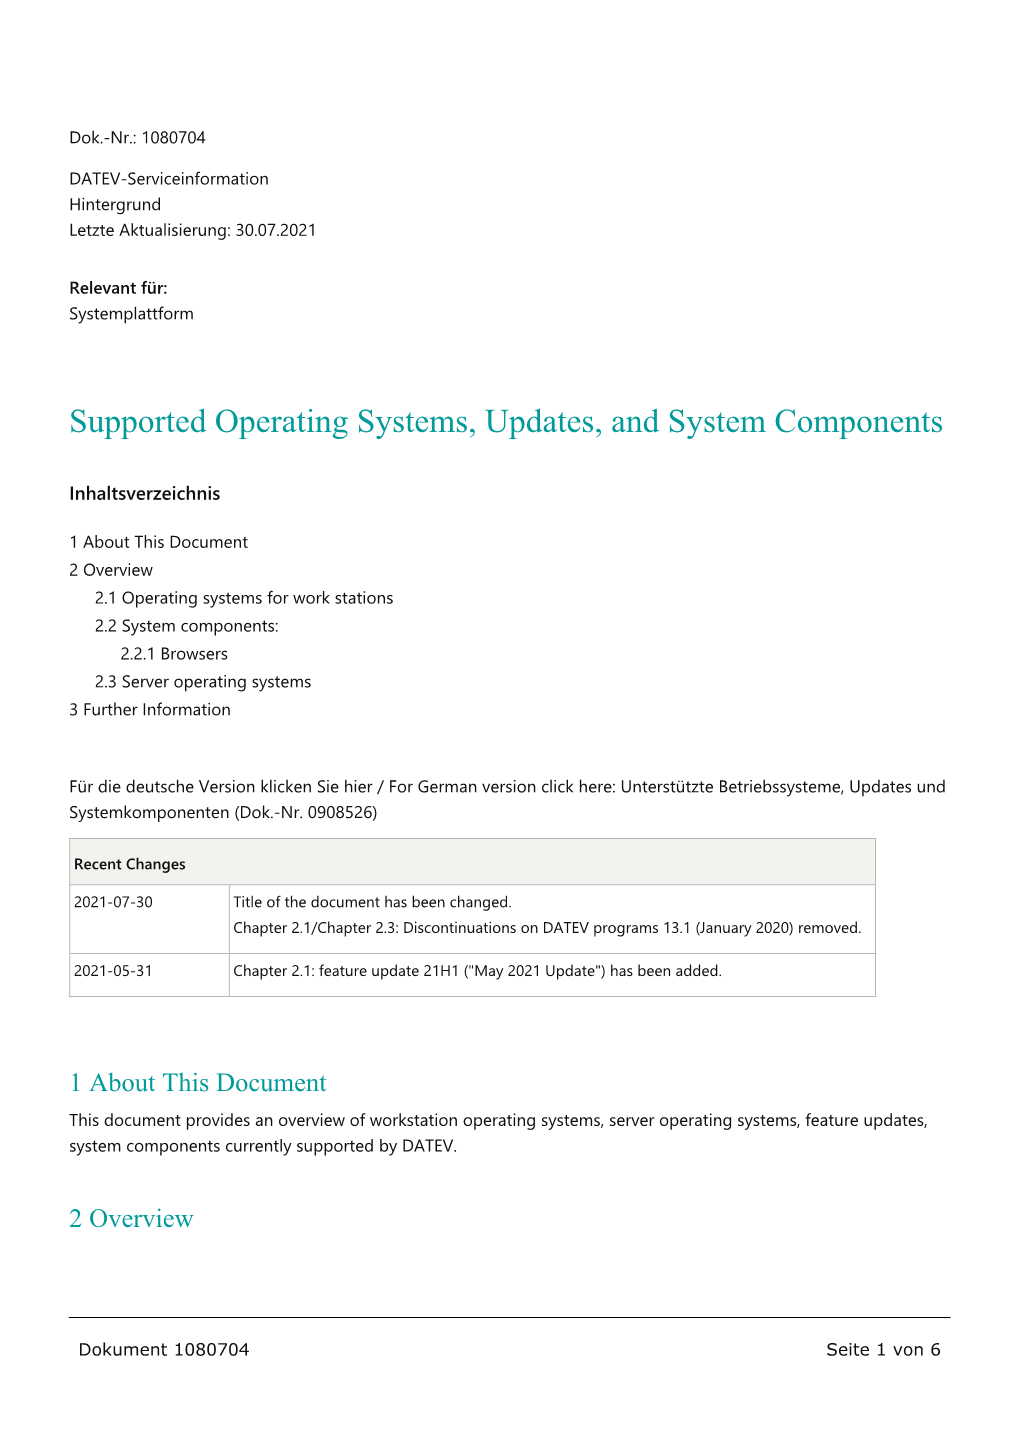 Supported Operating Systems, Updates, and System Components